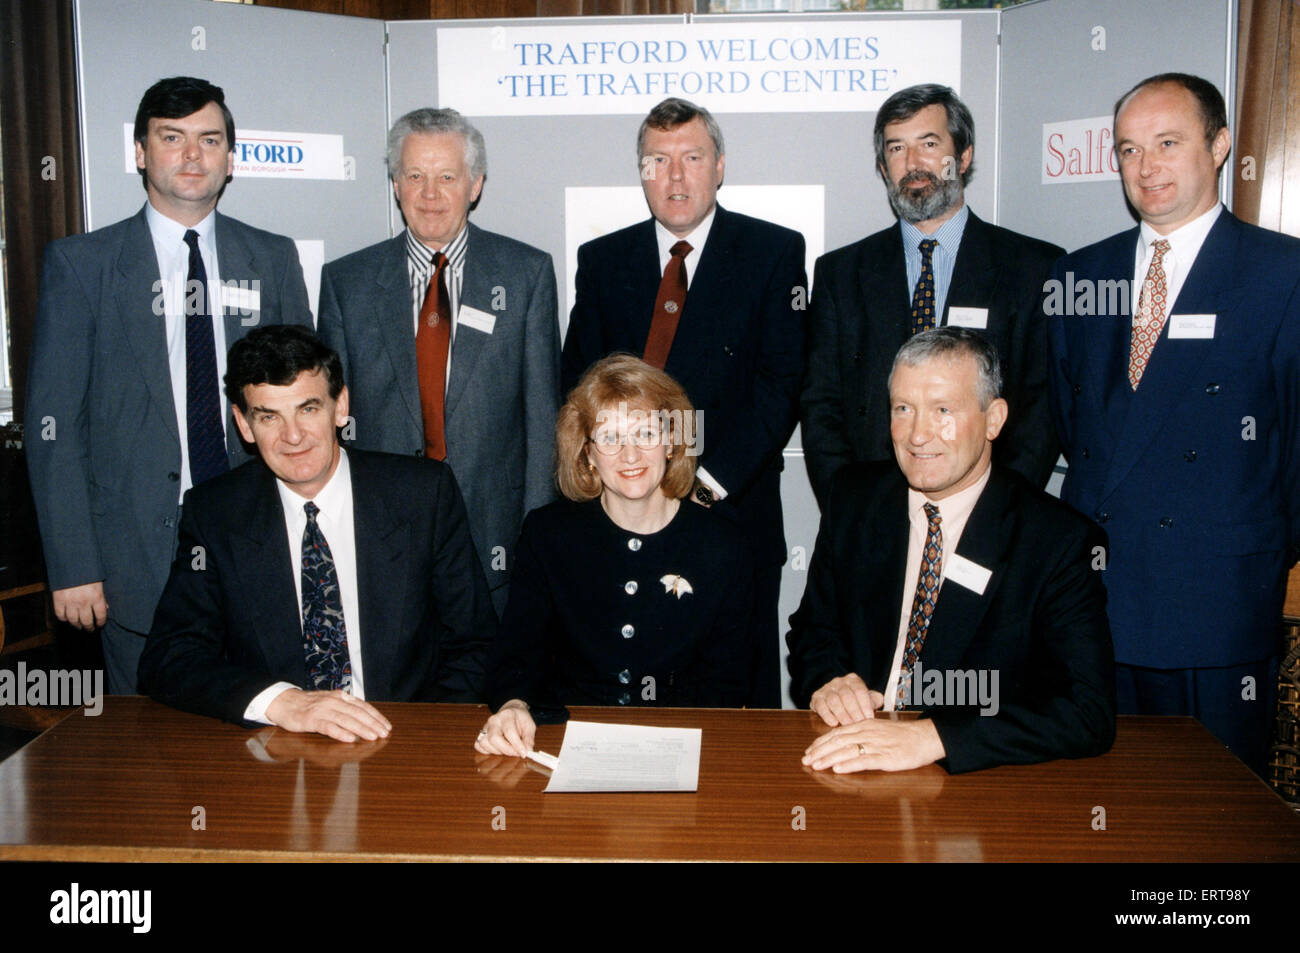 Signing of Construction Charter, for Trafford Centre, at Trafford Town Hall, Manchester, 16th October 1995.  Pictured. Beverley Hughes, Leader of Trafford Council, flanked by Robert Hough (left), Chairman of Manchester Ship Canal Company, and Dennis Bate, MD of Bovis North, with other officials. The Trafford Centre, a large indoor shopping centre and leisure complex in Dumplington, Greater Manchester, England, was opened on 10th September 1998, and is the second largest shopping centre in the United Kingdom by retail size. Stock Photo